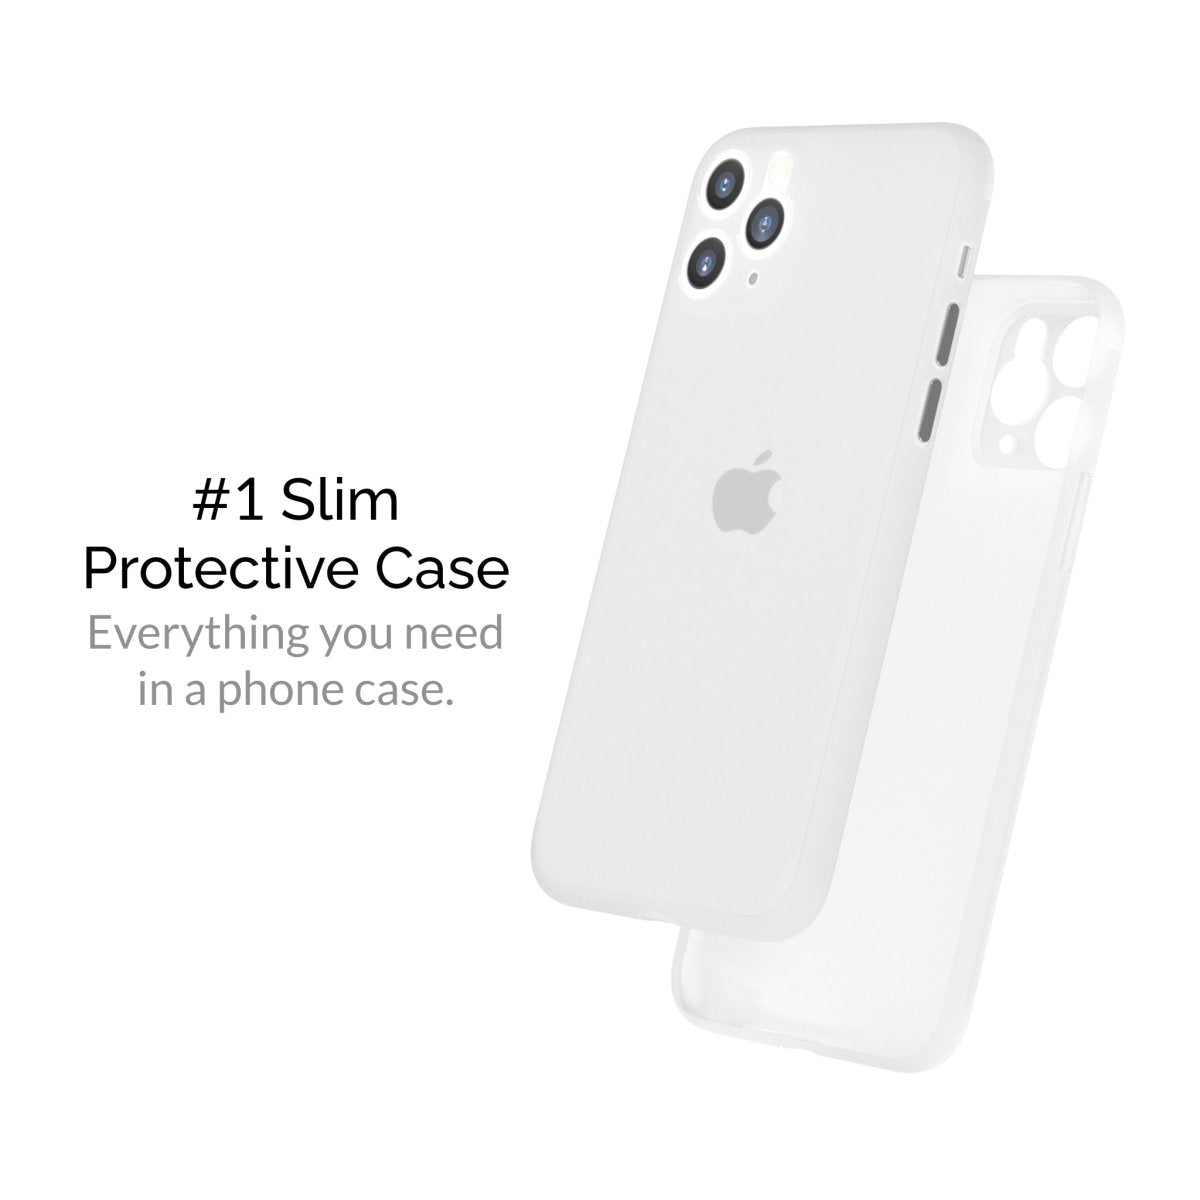 Slimcase Mobile Back Cover for iPhone 11 Pro - Slimcase IndiaCase